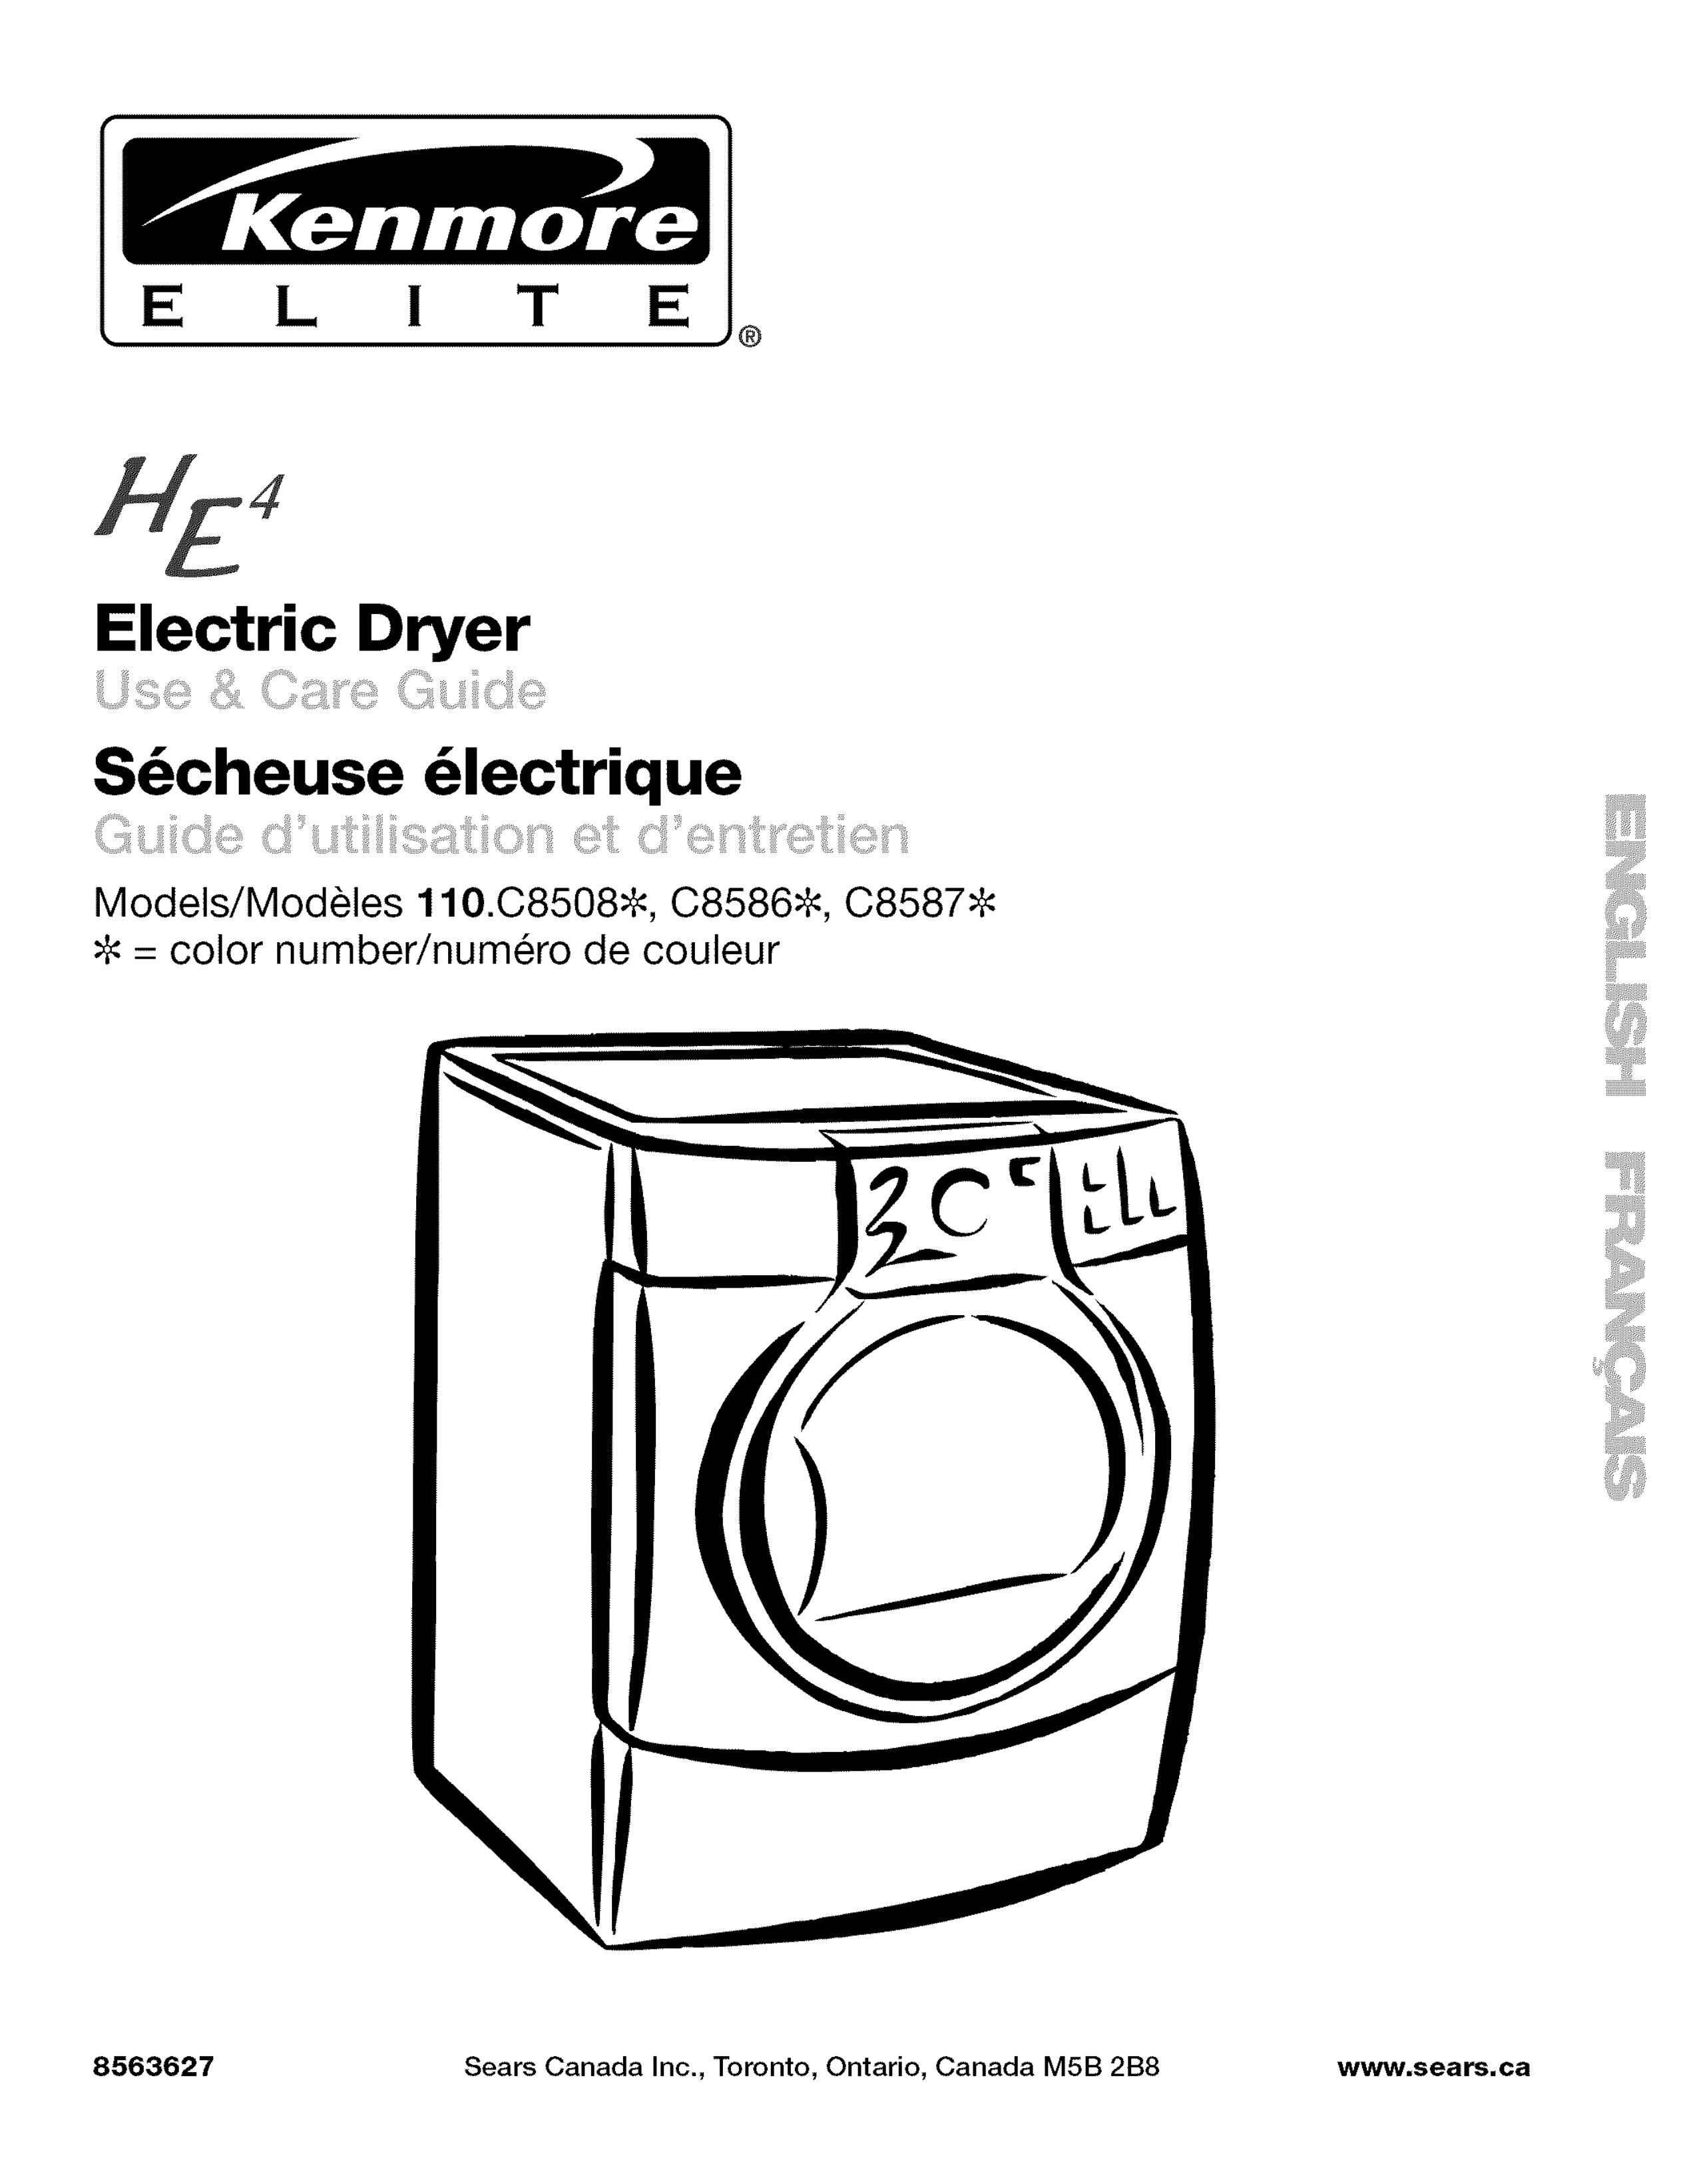 Kenmore 110.C8508 Clothes Dryer User Manual